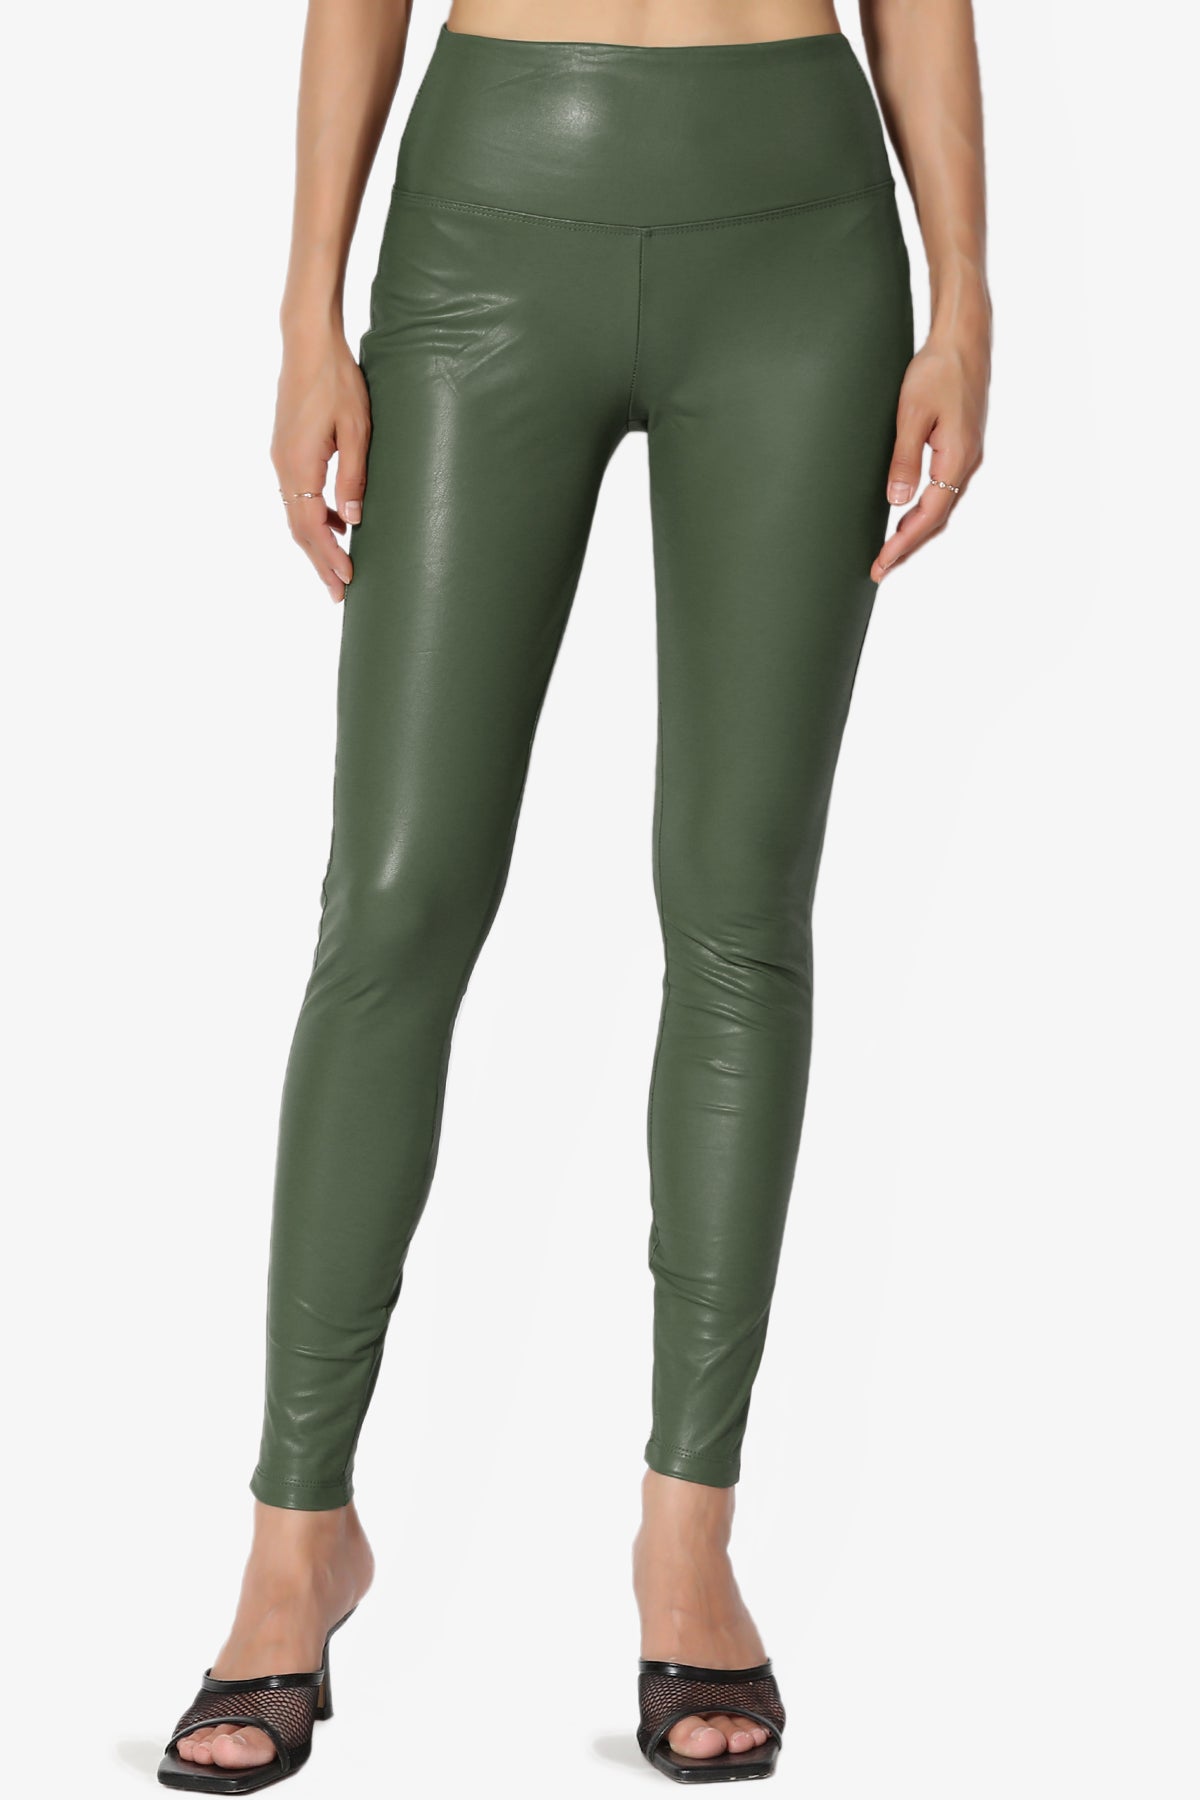 Faux Leather Pants for Women, Sexy High Waisted Tight Butt Lifting